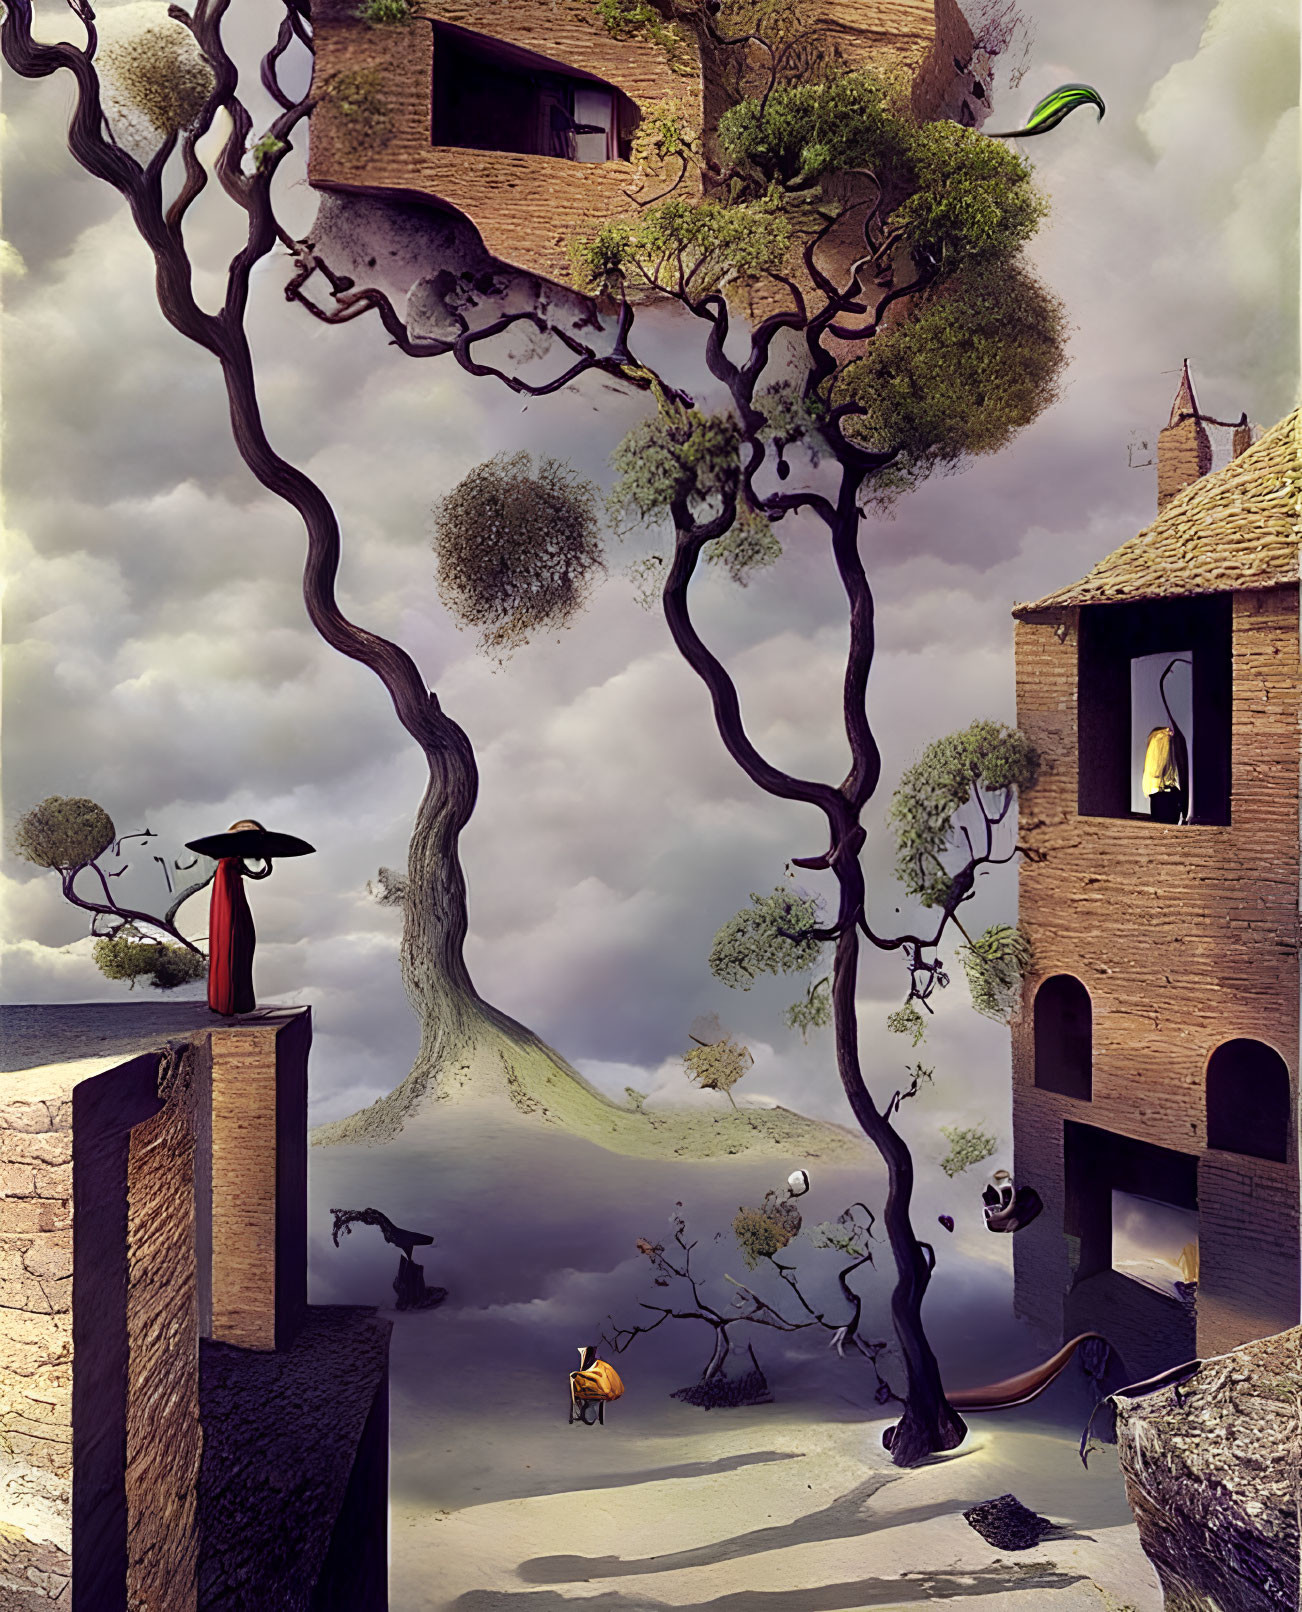 Surrealist artwork: Twisted trees, floating island-houses, red cloaked figure, whims